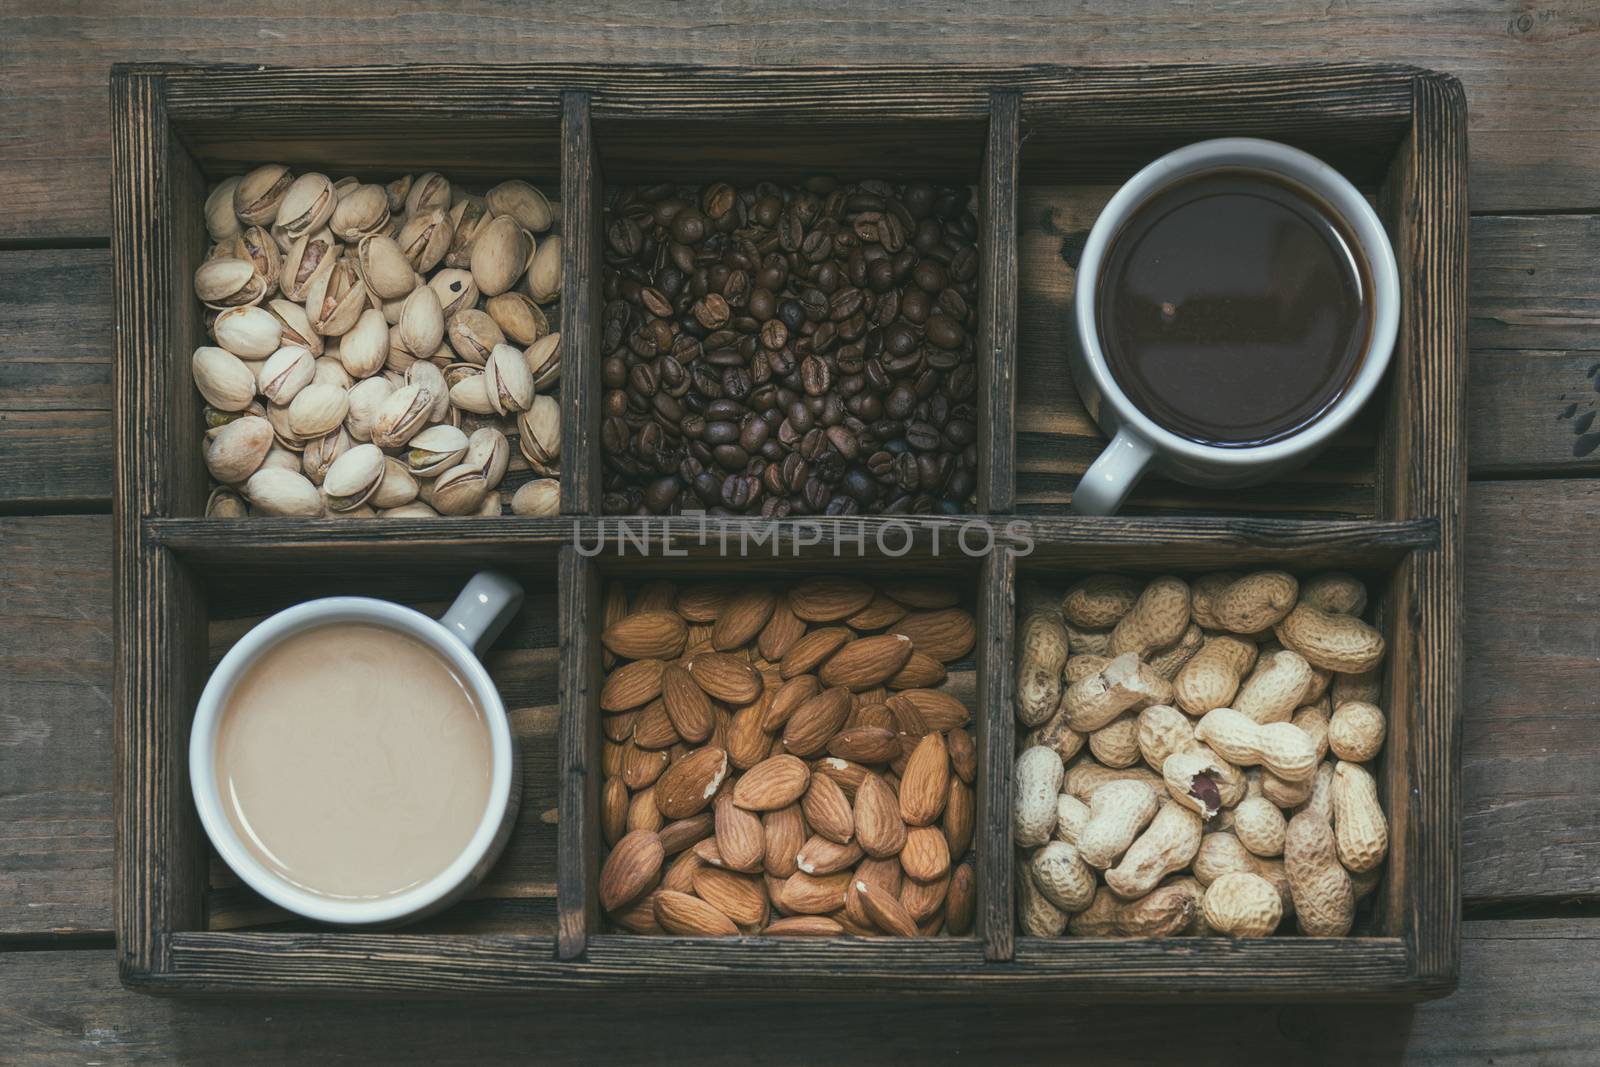 Cup of black coffee, cup of coffee with milk, almond, pistachios, peanut and coffee beans in box. Dark wooden background. Beautiful vintage coffee groundwork. Coloring and processing photo.